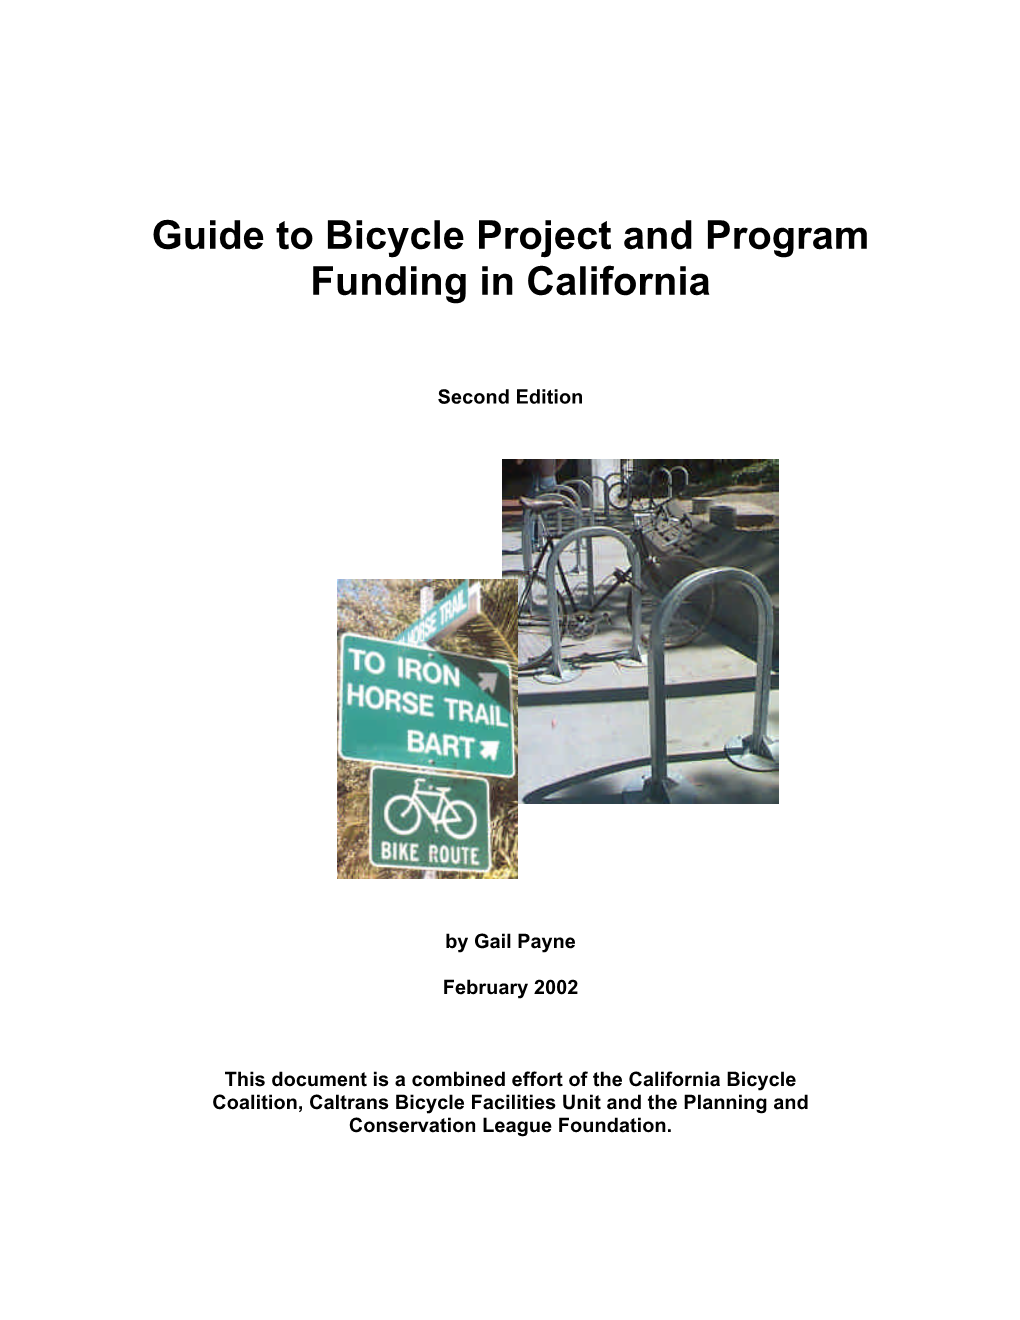 Guide to Bicycle Project and Program Funding in California